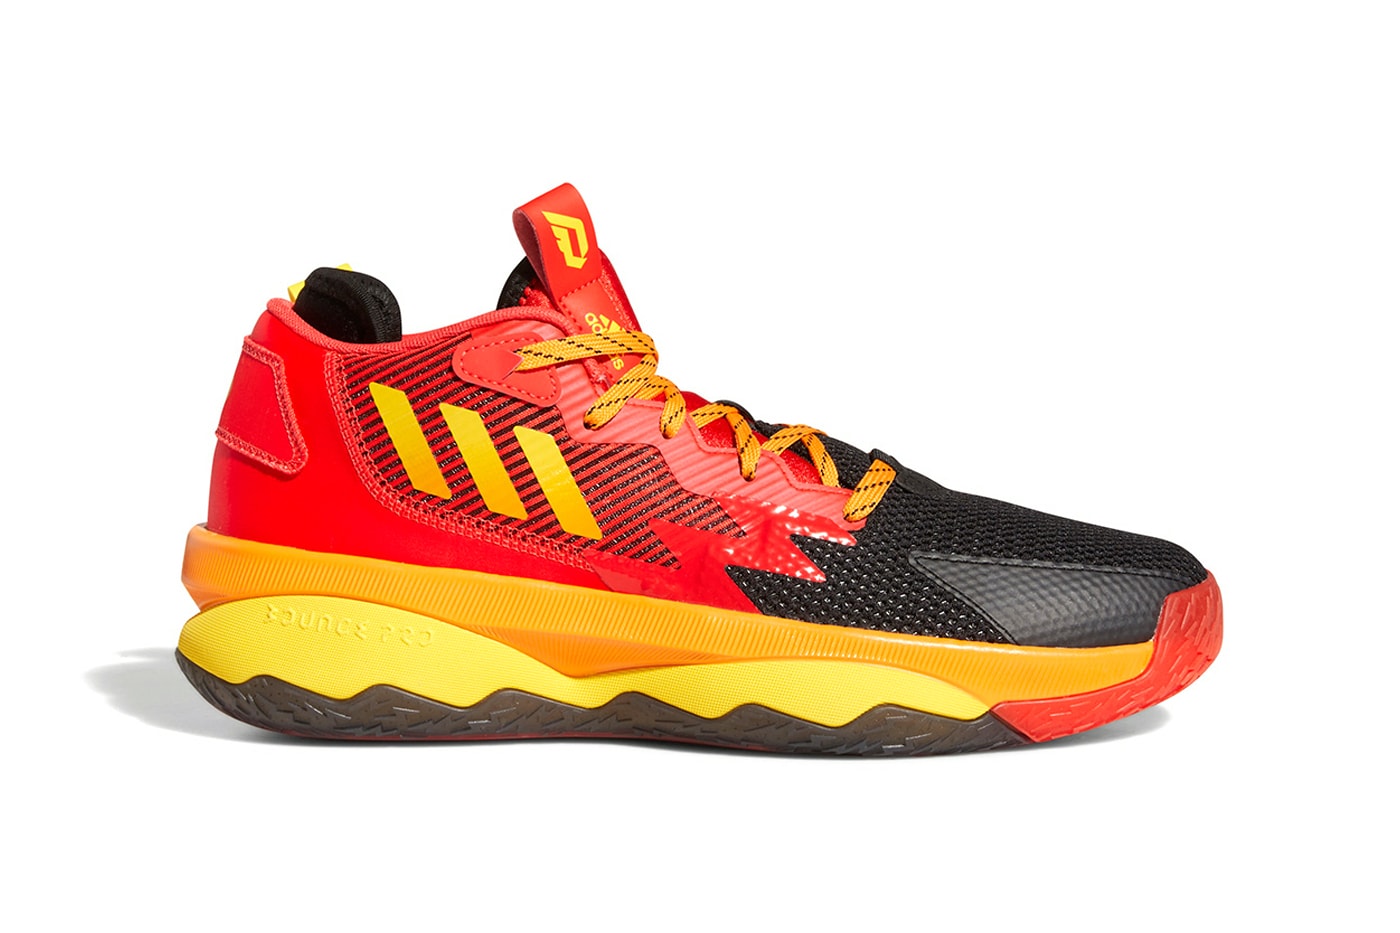 Women's adidas x Candace Parker Exhibit Select Basketball Shoes